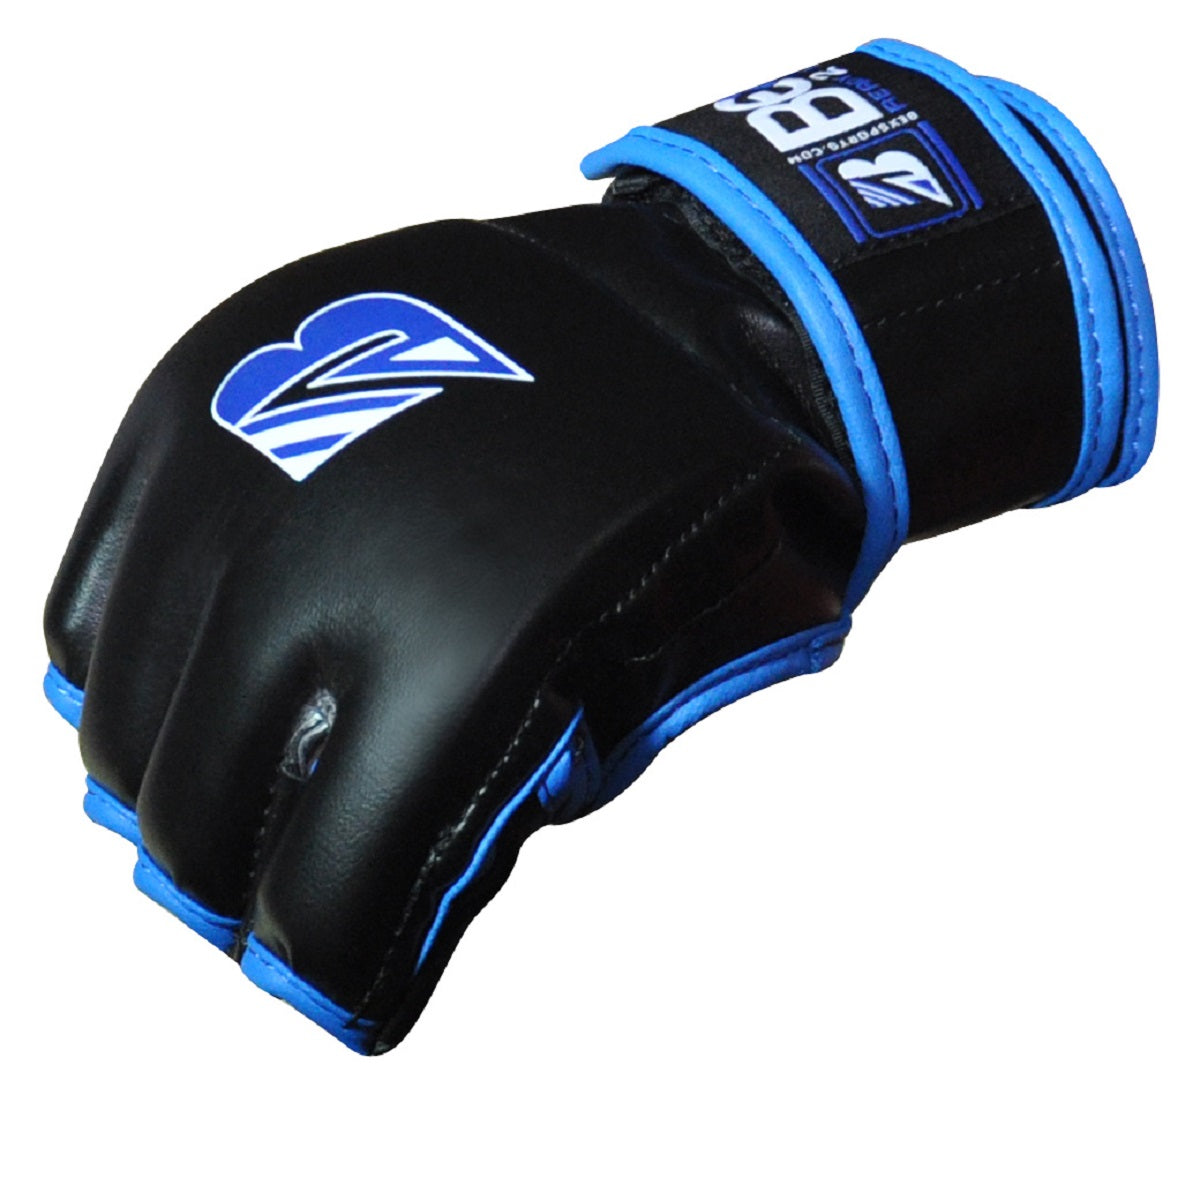 MMA Gloves Ultimate MMA Fingerless Boxing Gloves: Premium Quality, Pro-Grade Gear Fighters and Athlete